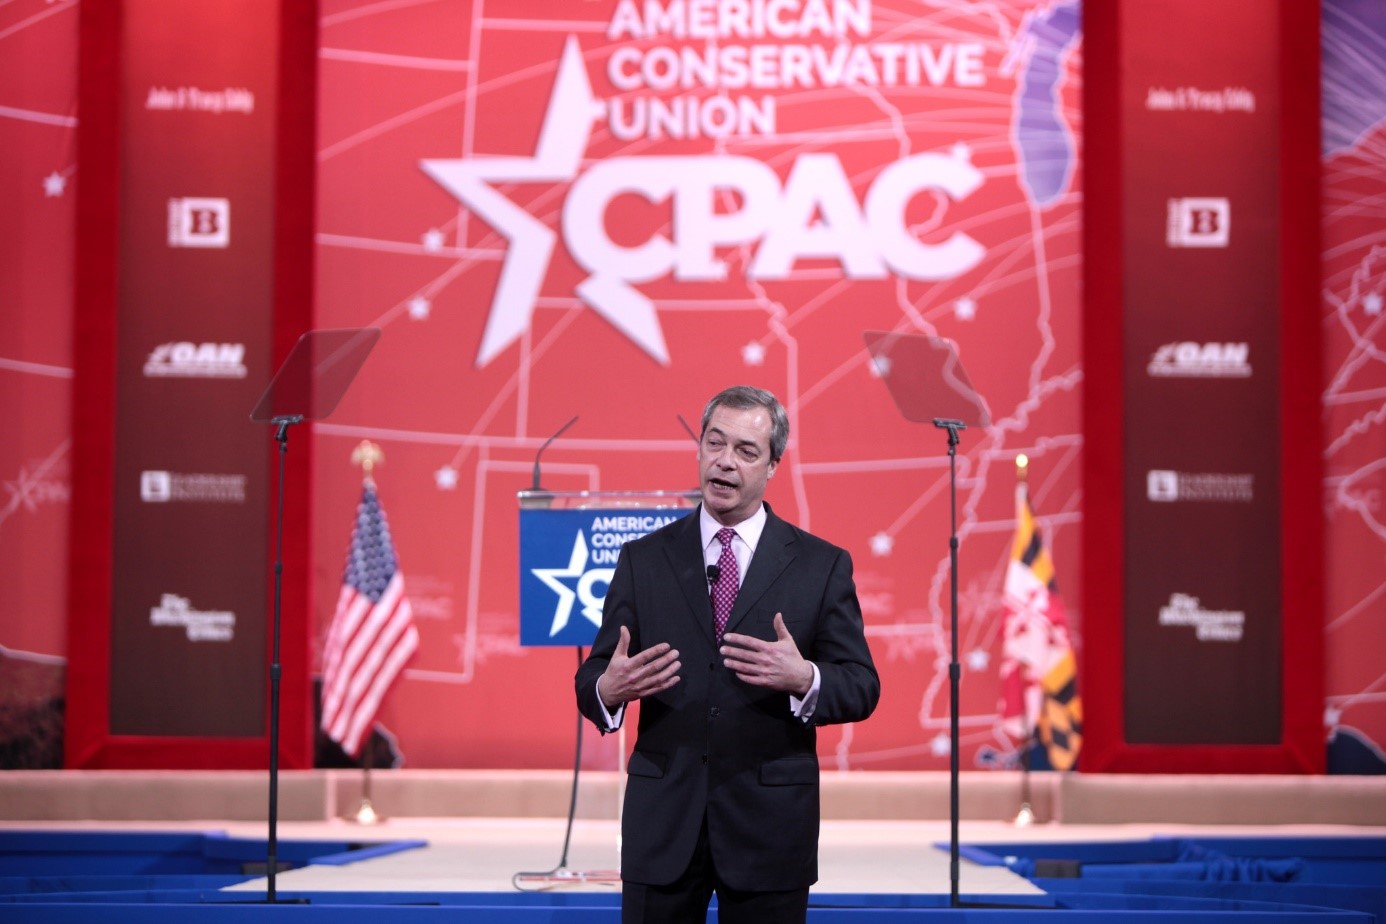 Nigel Farage speaking at the 2015 Conservative Political Action Conference (CPAC) in National Harbor, Maryland. Photo: flickr / Gage Skidmore